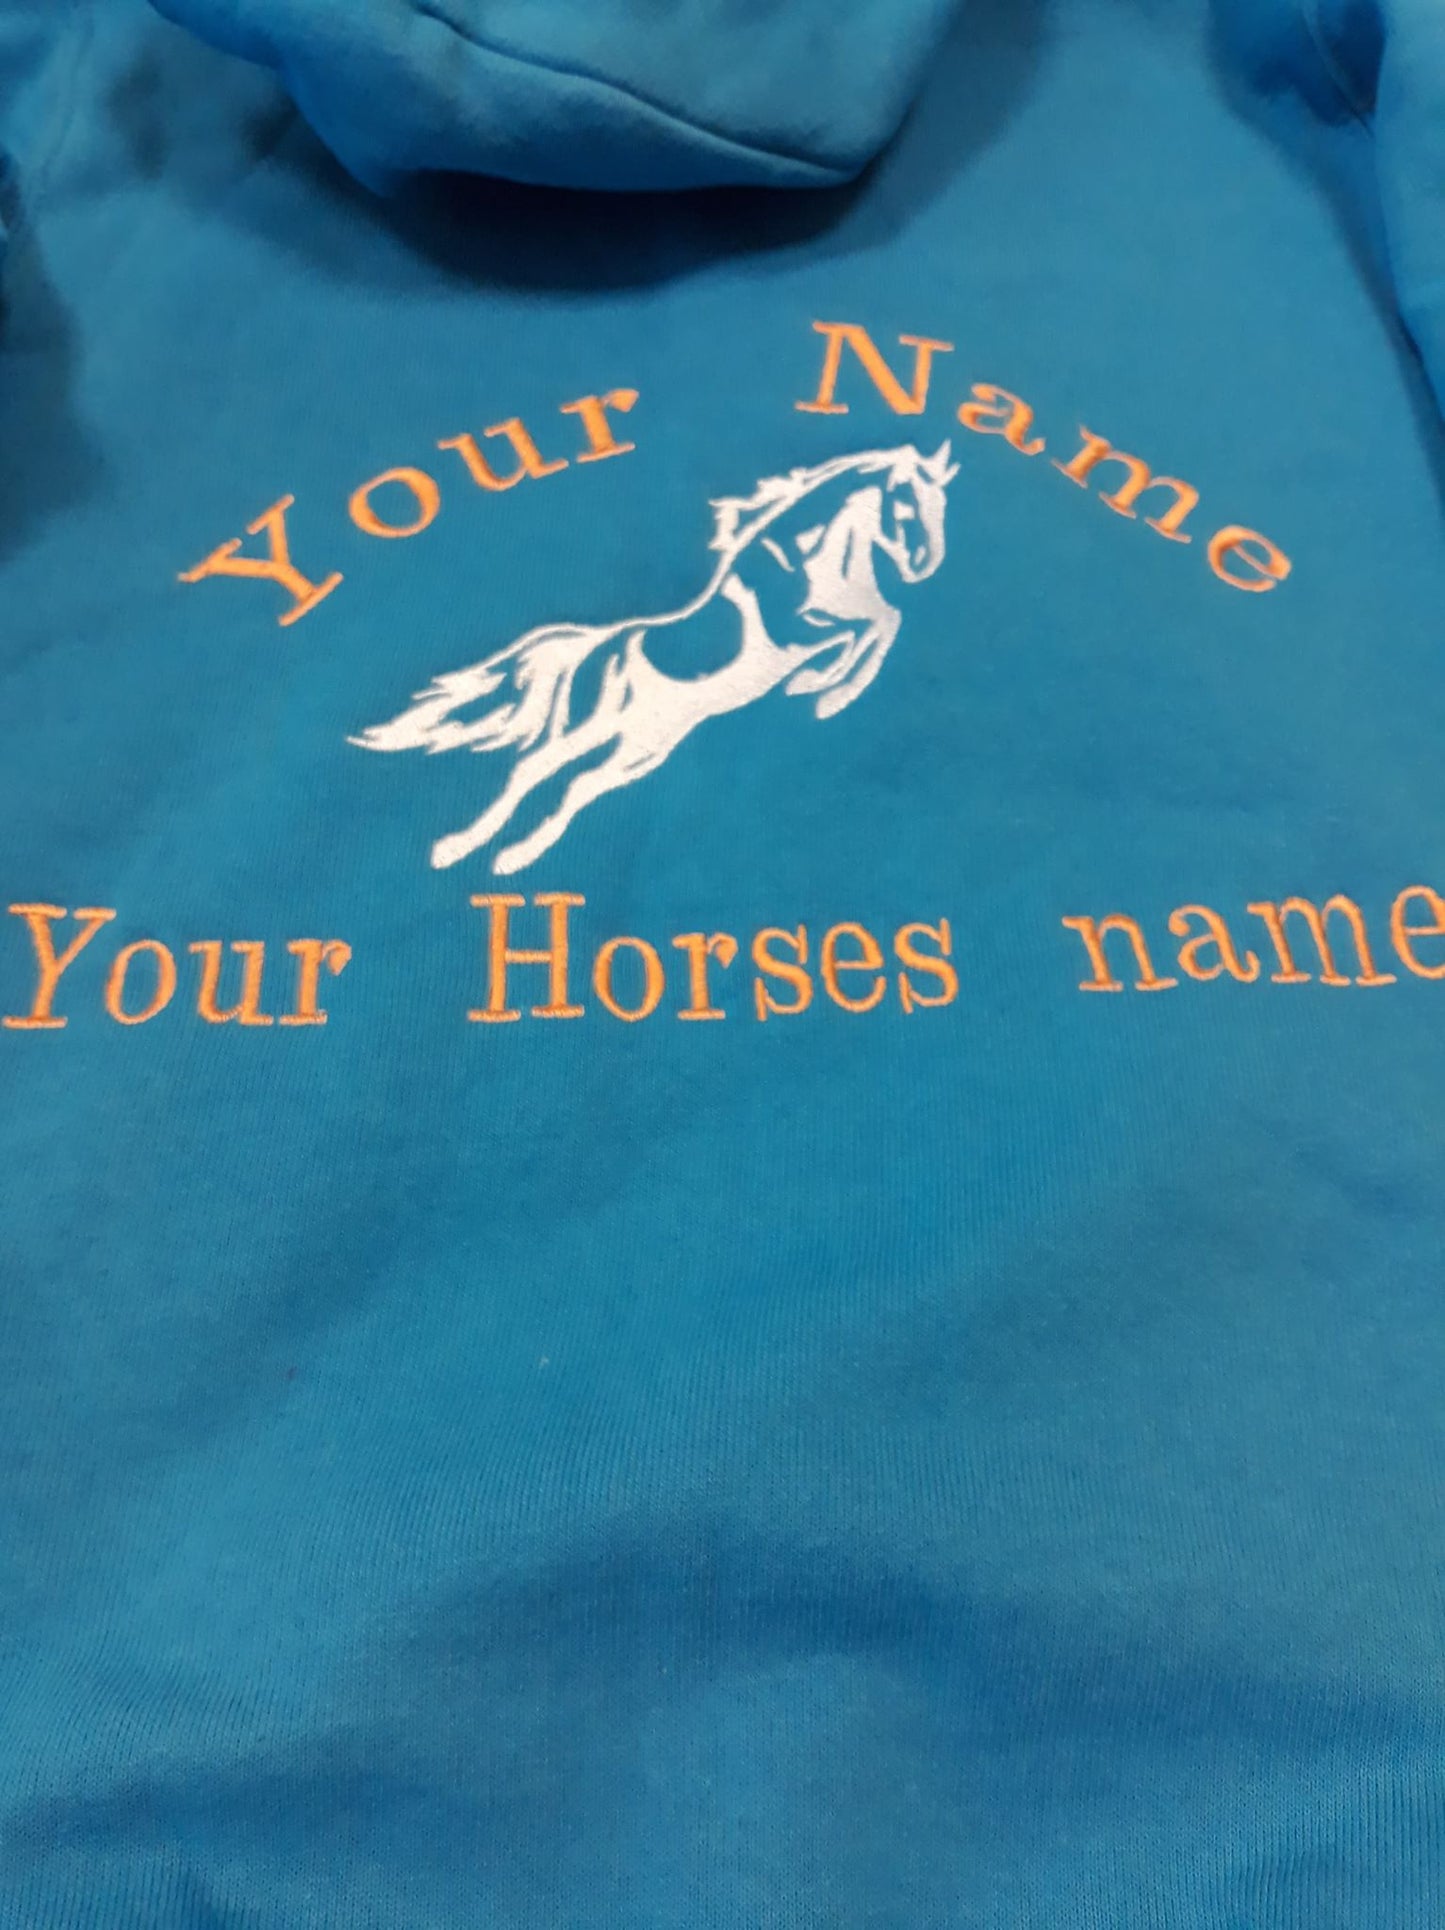 Personalised horse hoodie , personalised horse hoodie, personalised horse hoodie , horse hoodie with embroidery , equestrian embroidery, gift for horse lover, gift for horse ridersaddlecloth, personalised equestrian wear, birthday present for horse lover 